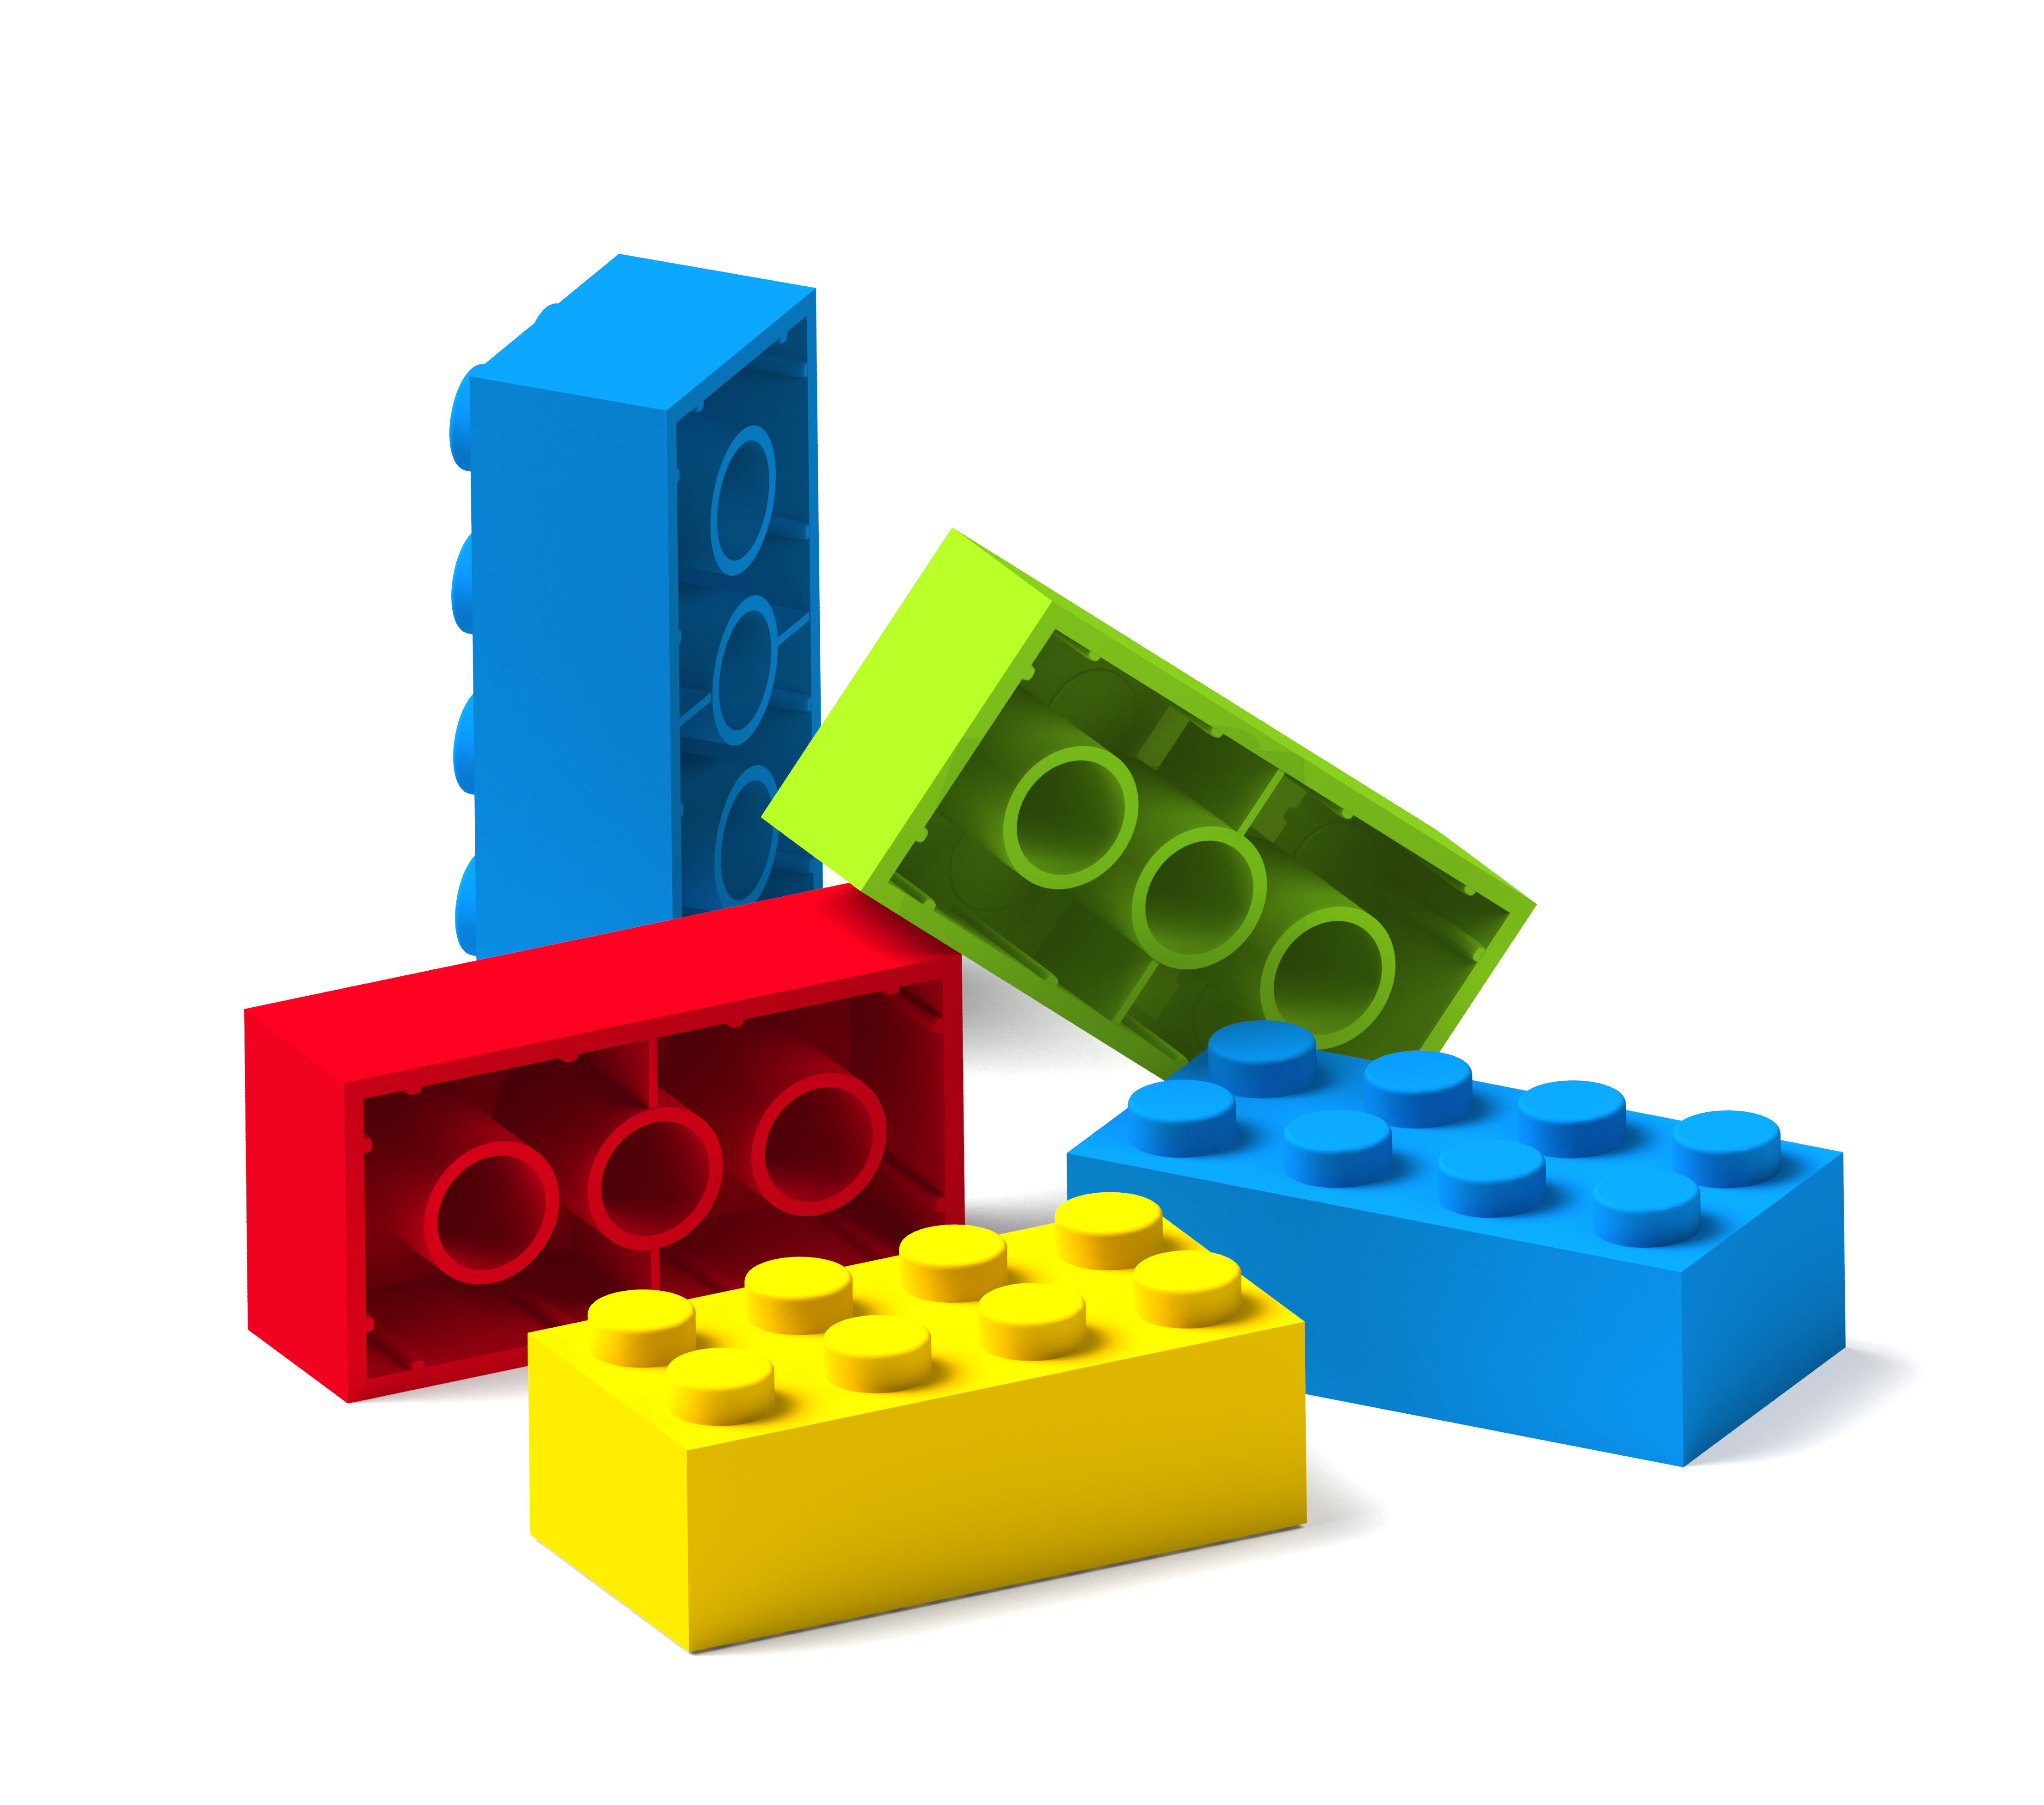 Colorful building toy blocks 3D isolated on white